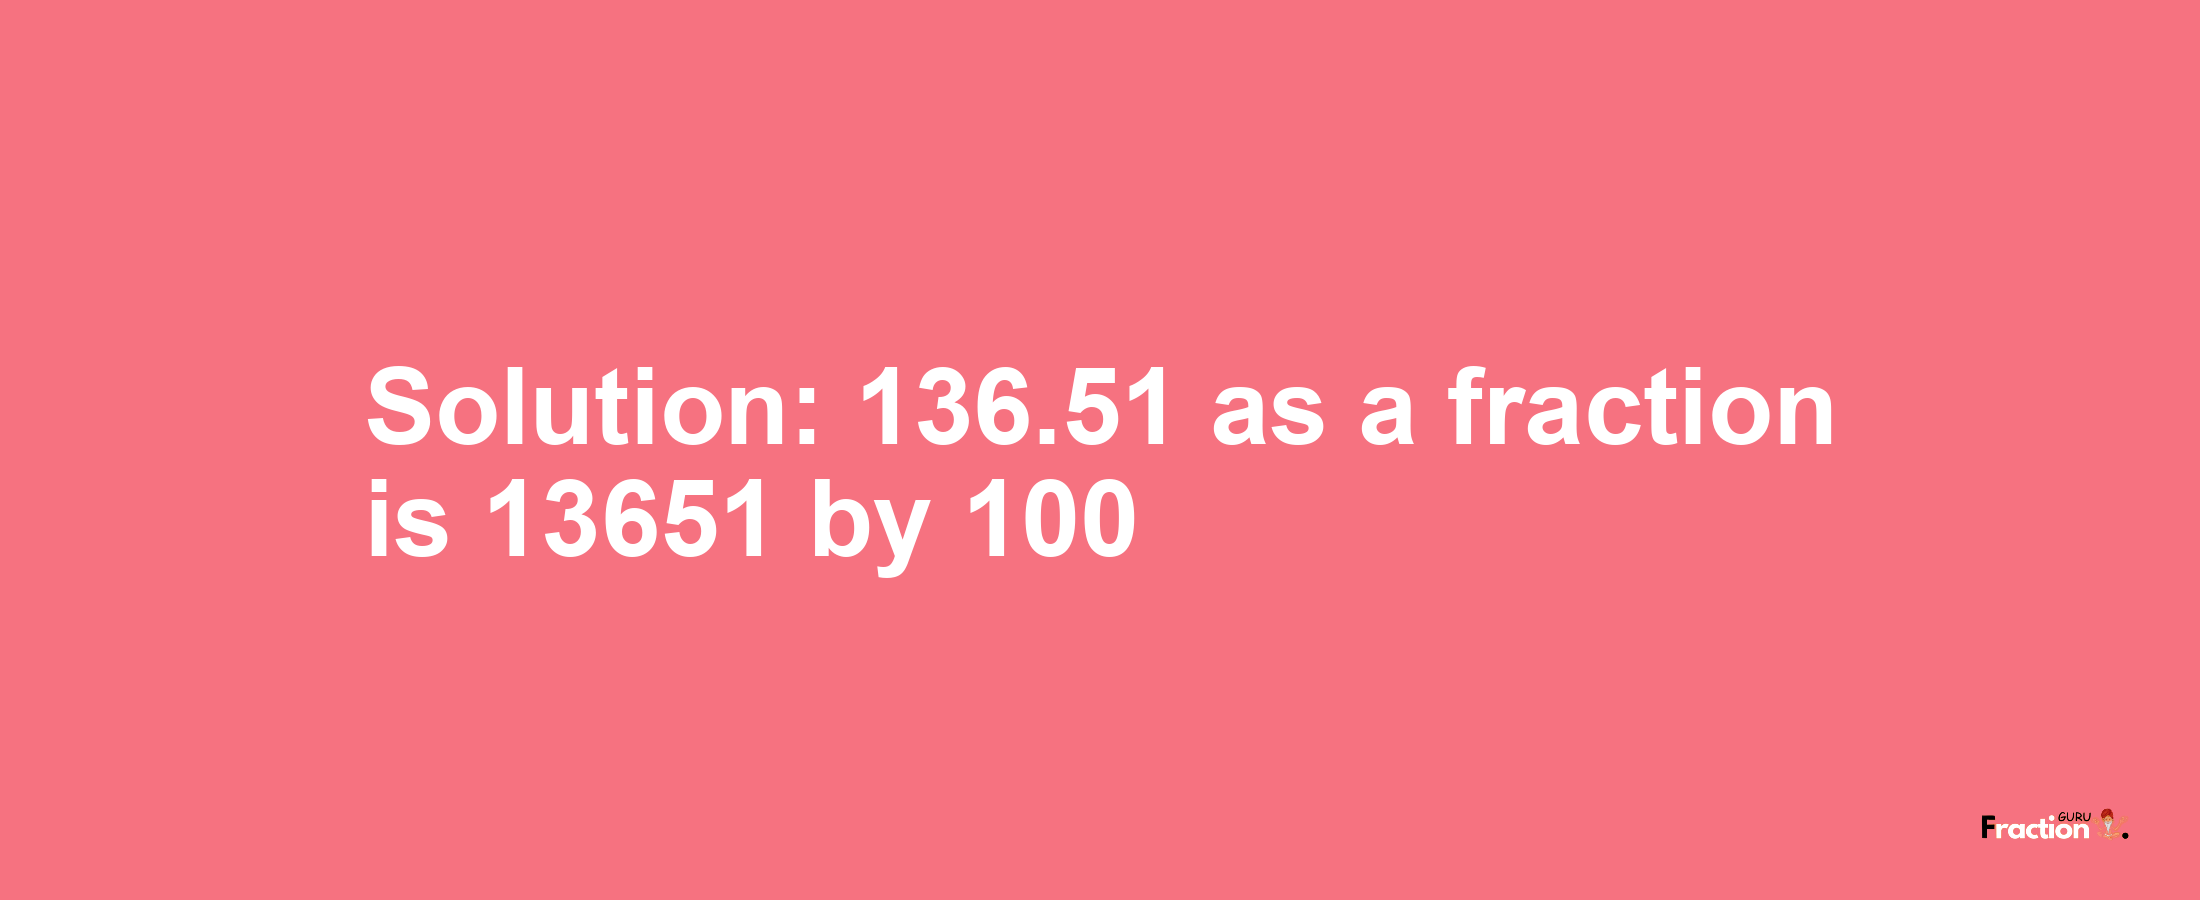 Solution:136.51 as a fraction is 13651/100